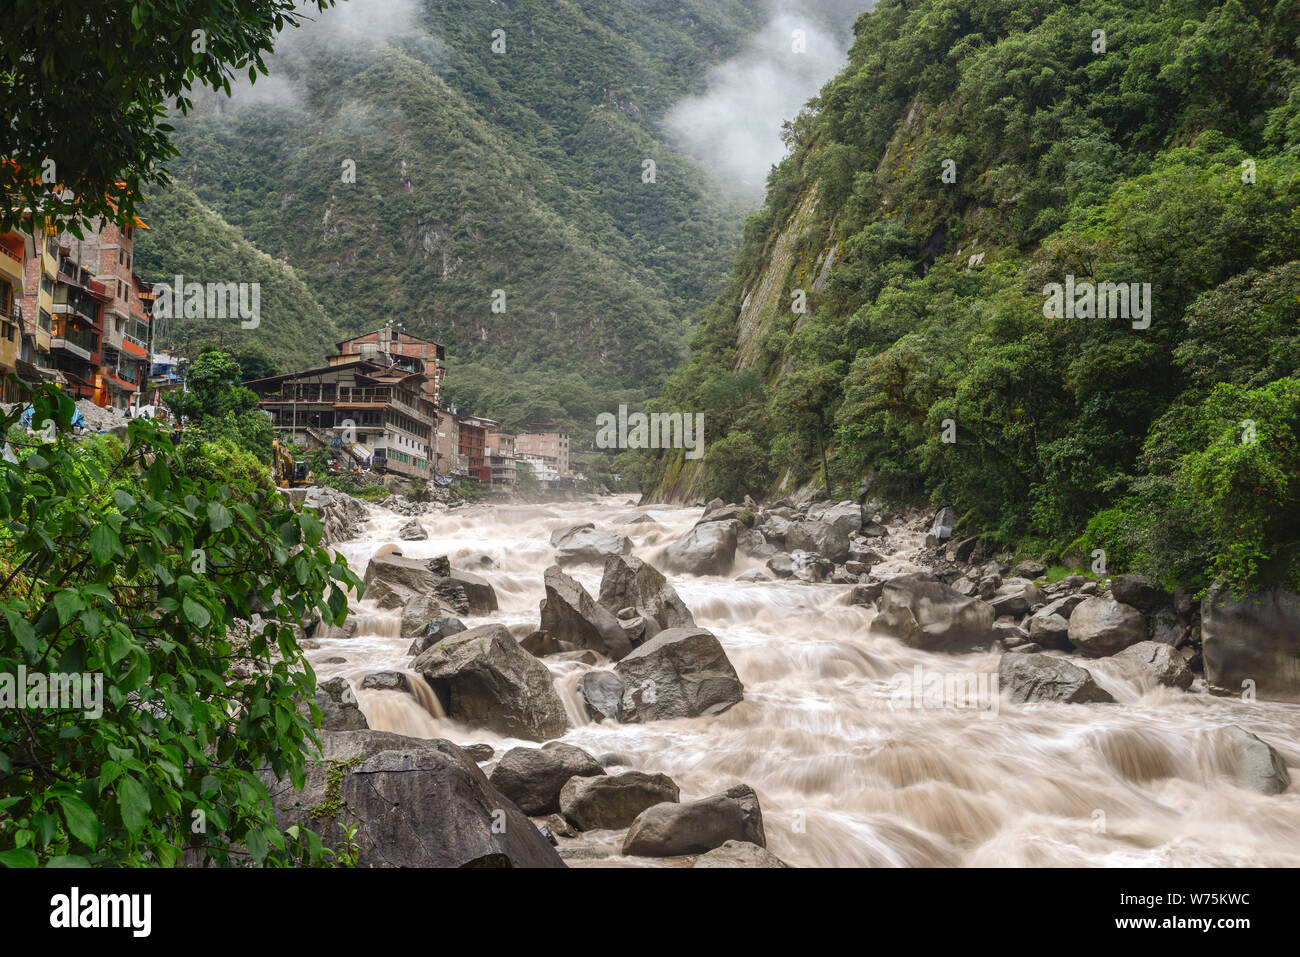 Aguas Calientes town landscape with powerful Urubamaba river on foreground in Peru Stock Photo